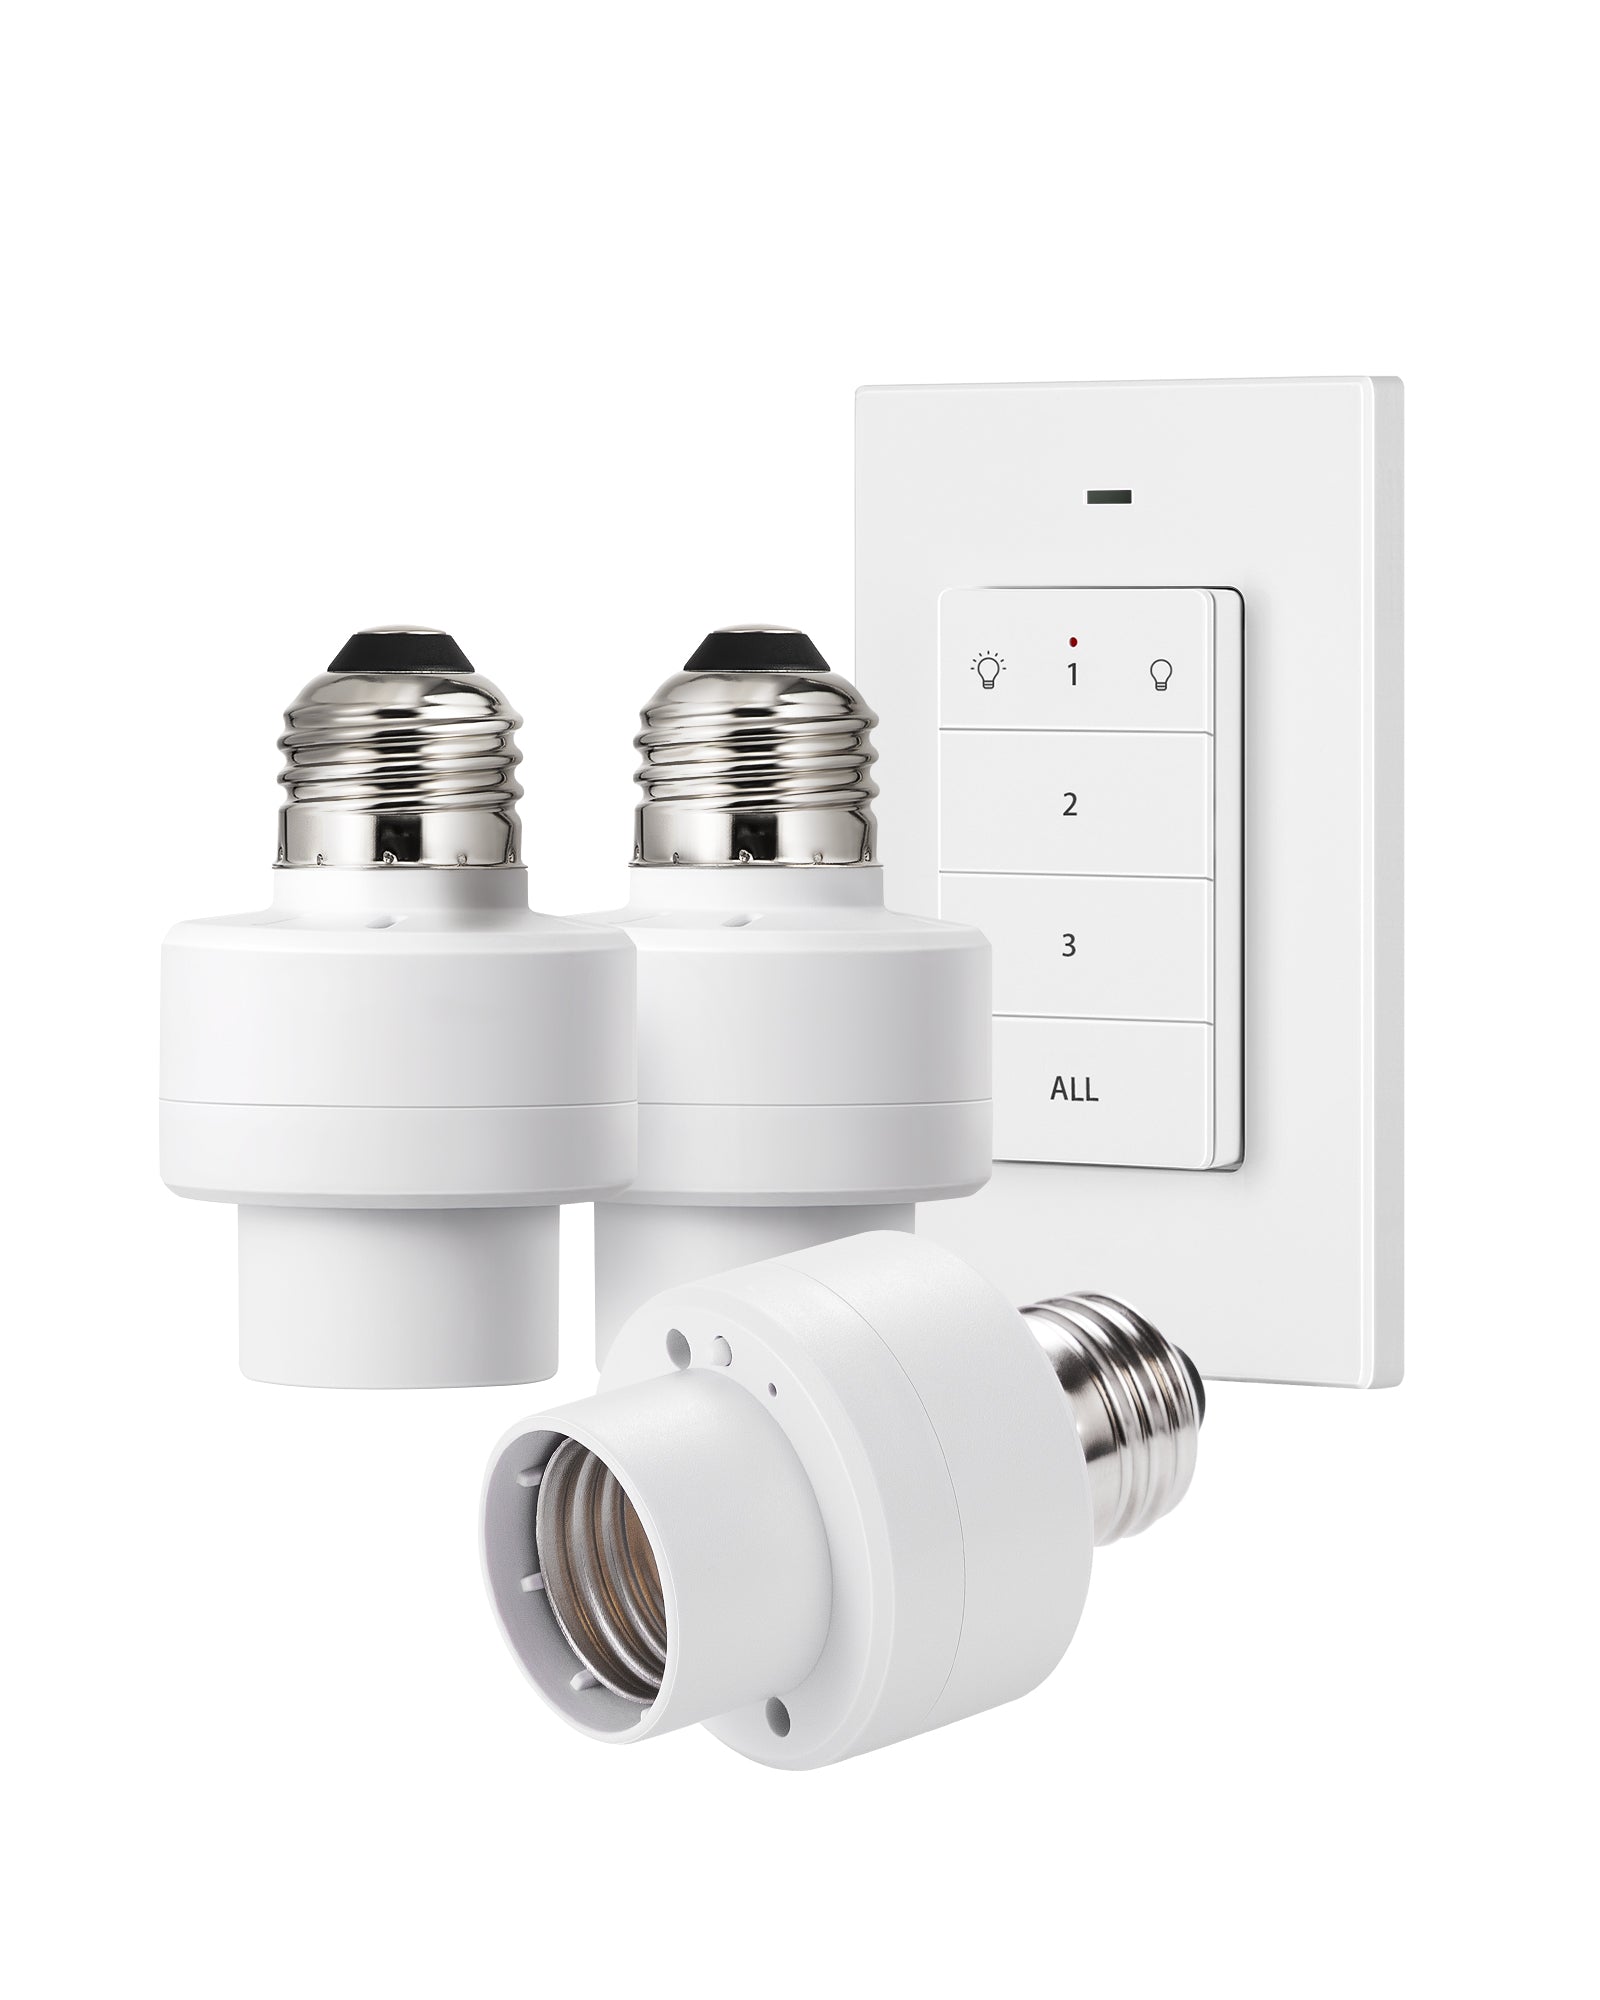 DEWENWILS Programmable Wireless Remote Control Light Bulb Socket (E26/E27)  and Switch (1 Remote + 3 Sockets)--SHRLS13A1